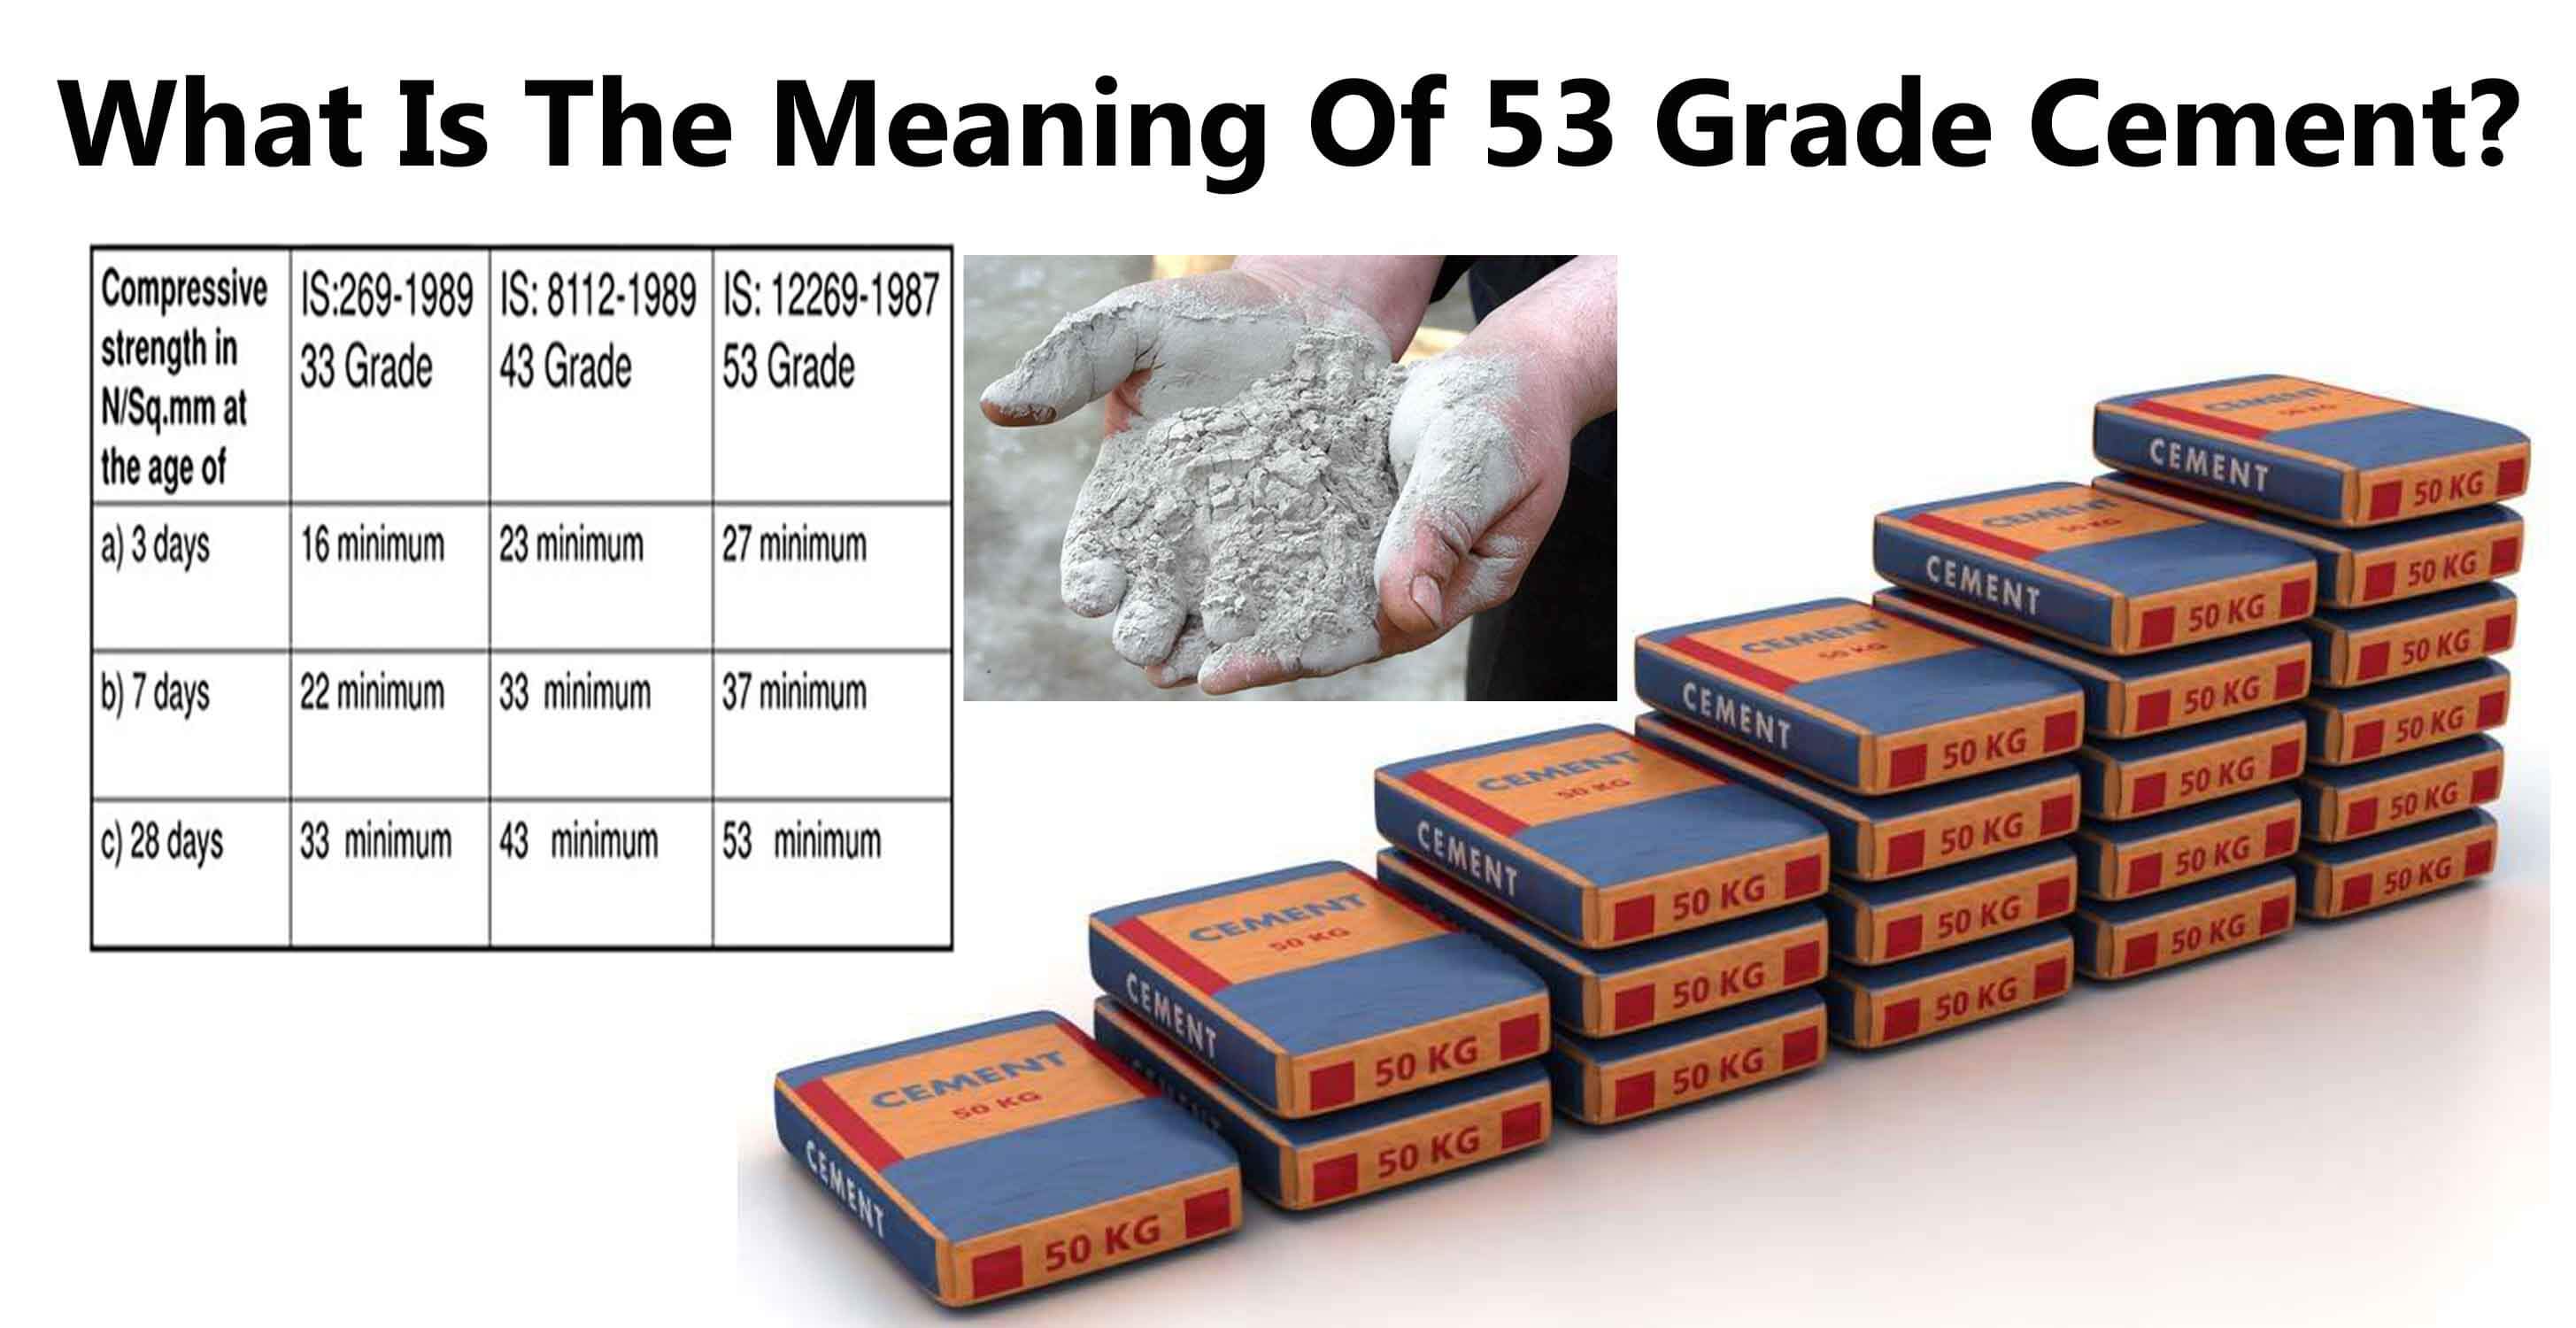 What Is The Meaning Of 53 Grade Cement? - Engineering Discoveries